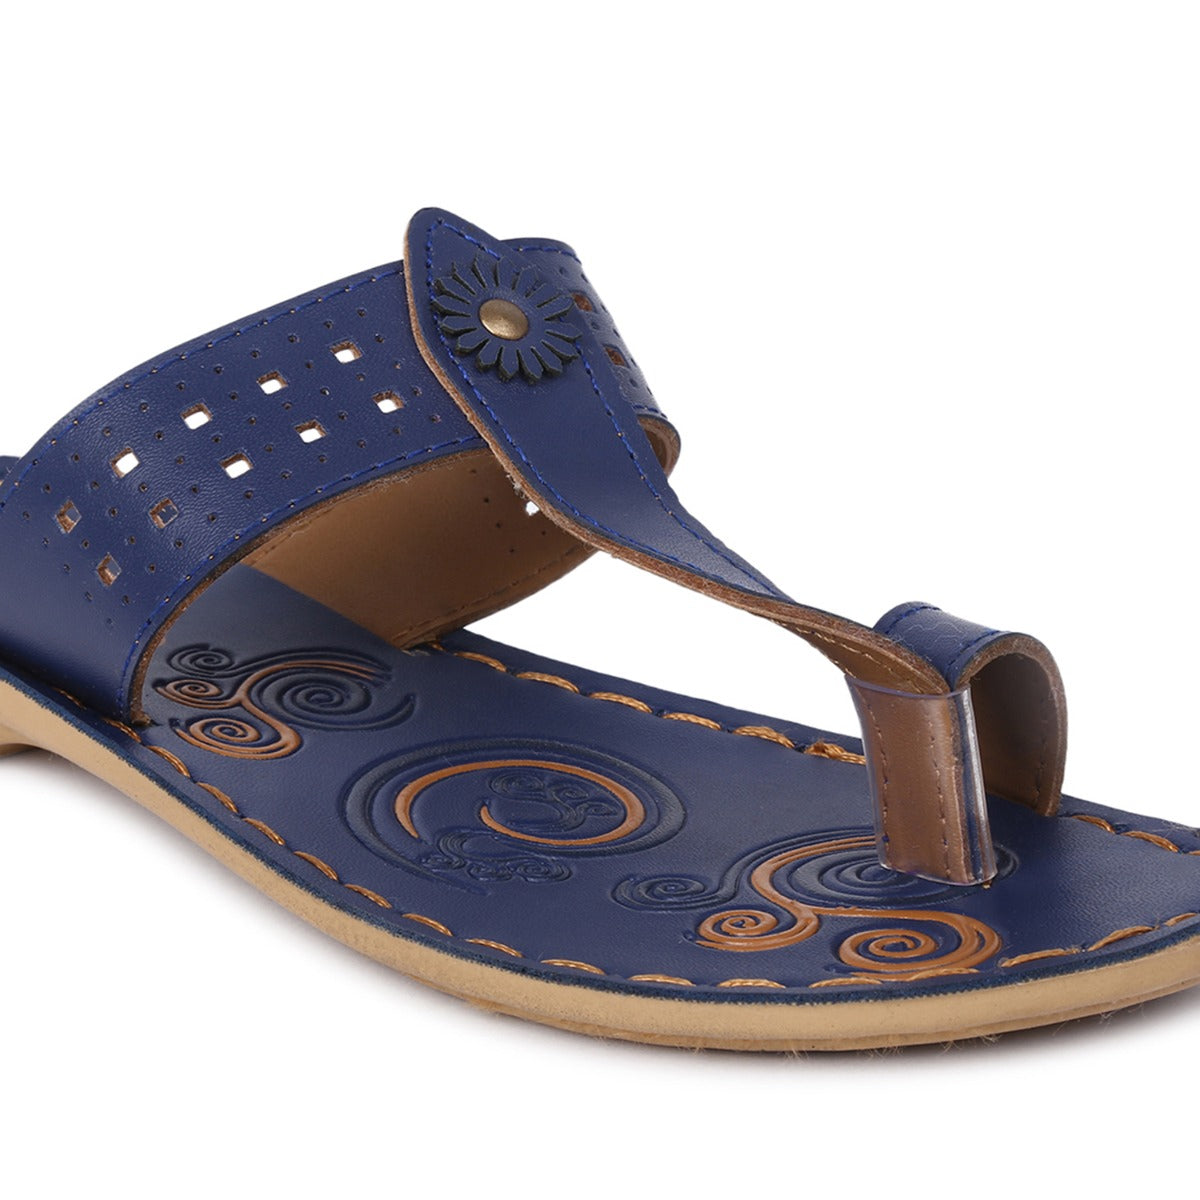 Paragon  K7200LS Women Sandals | Casual &amp; Formal Sandals | Stylish, Comfortable &amp; Durable | For Daily &amp; Occasion Wear